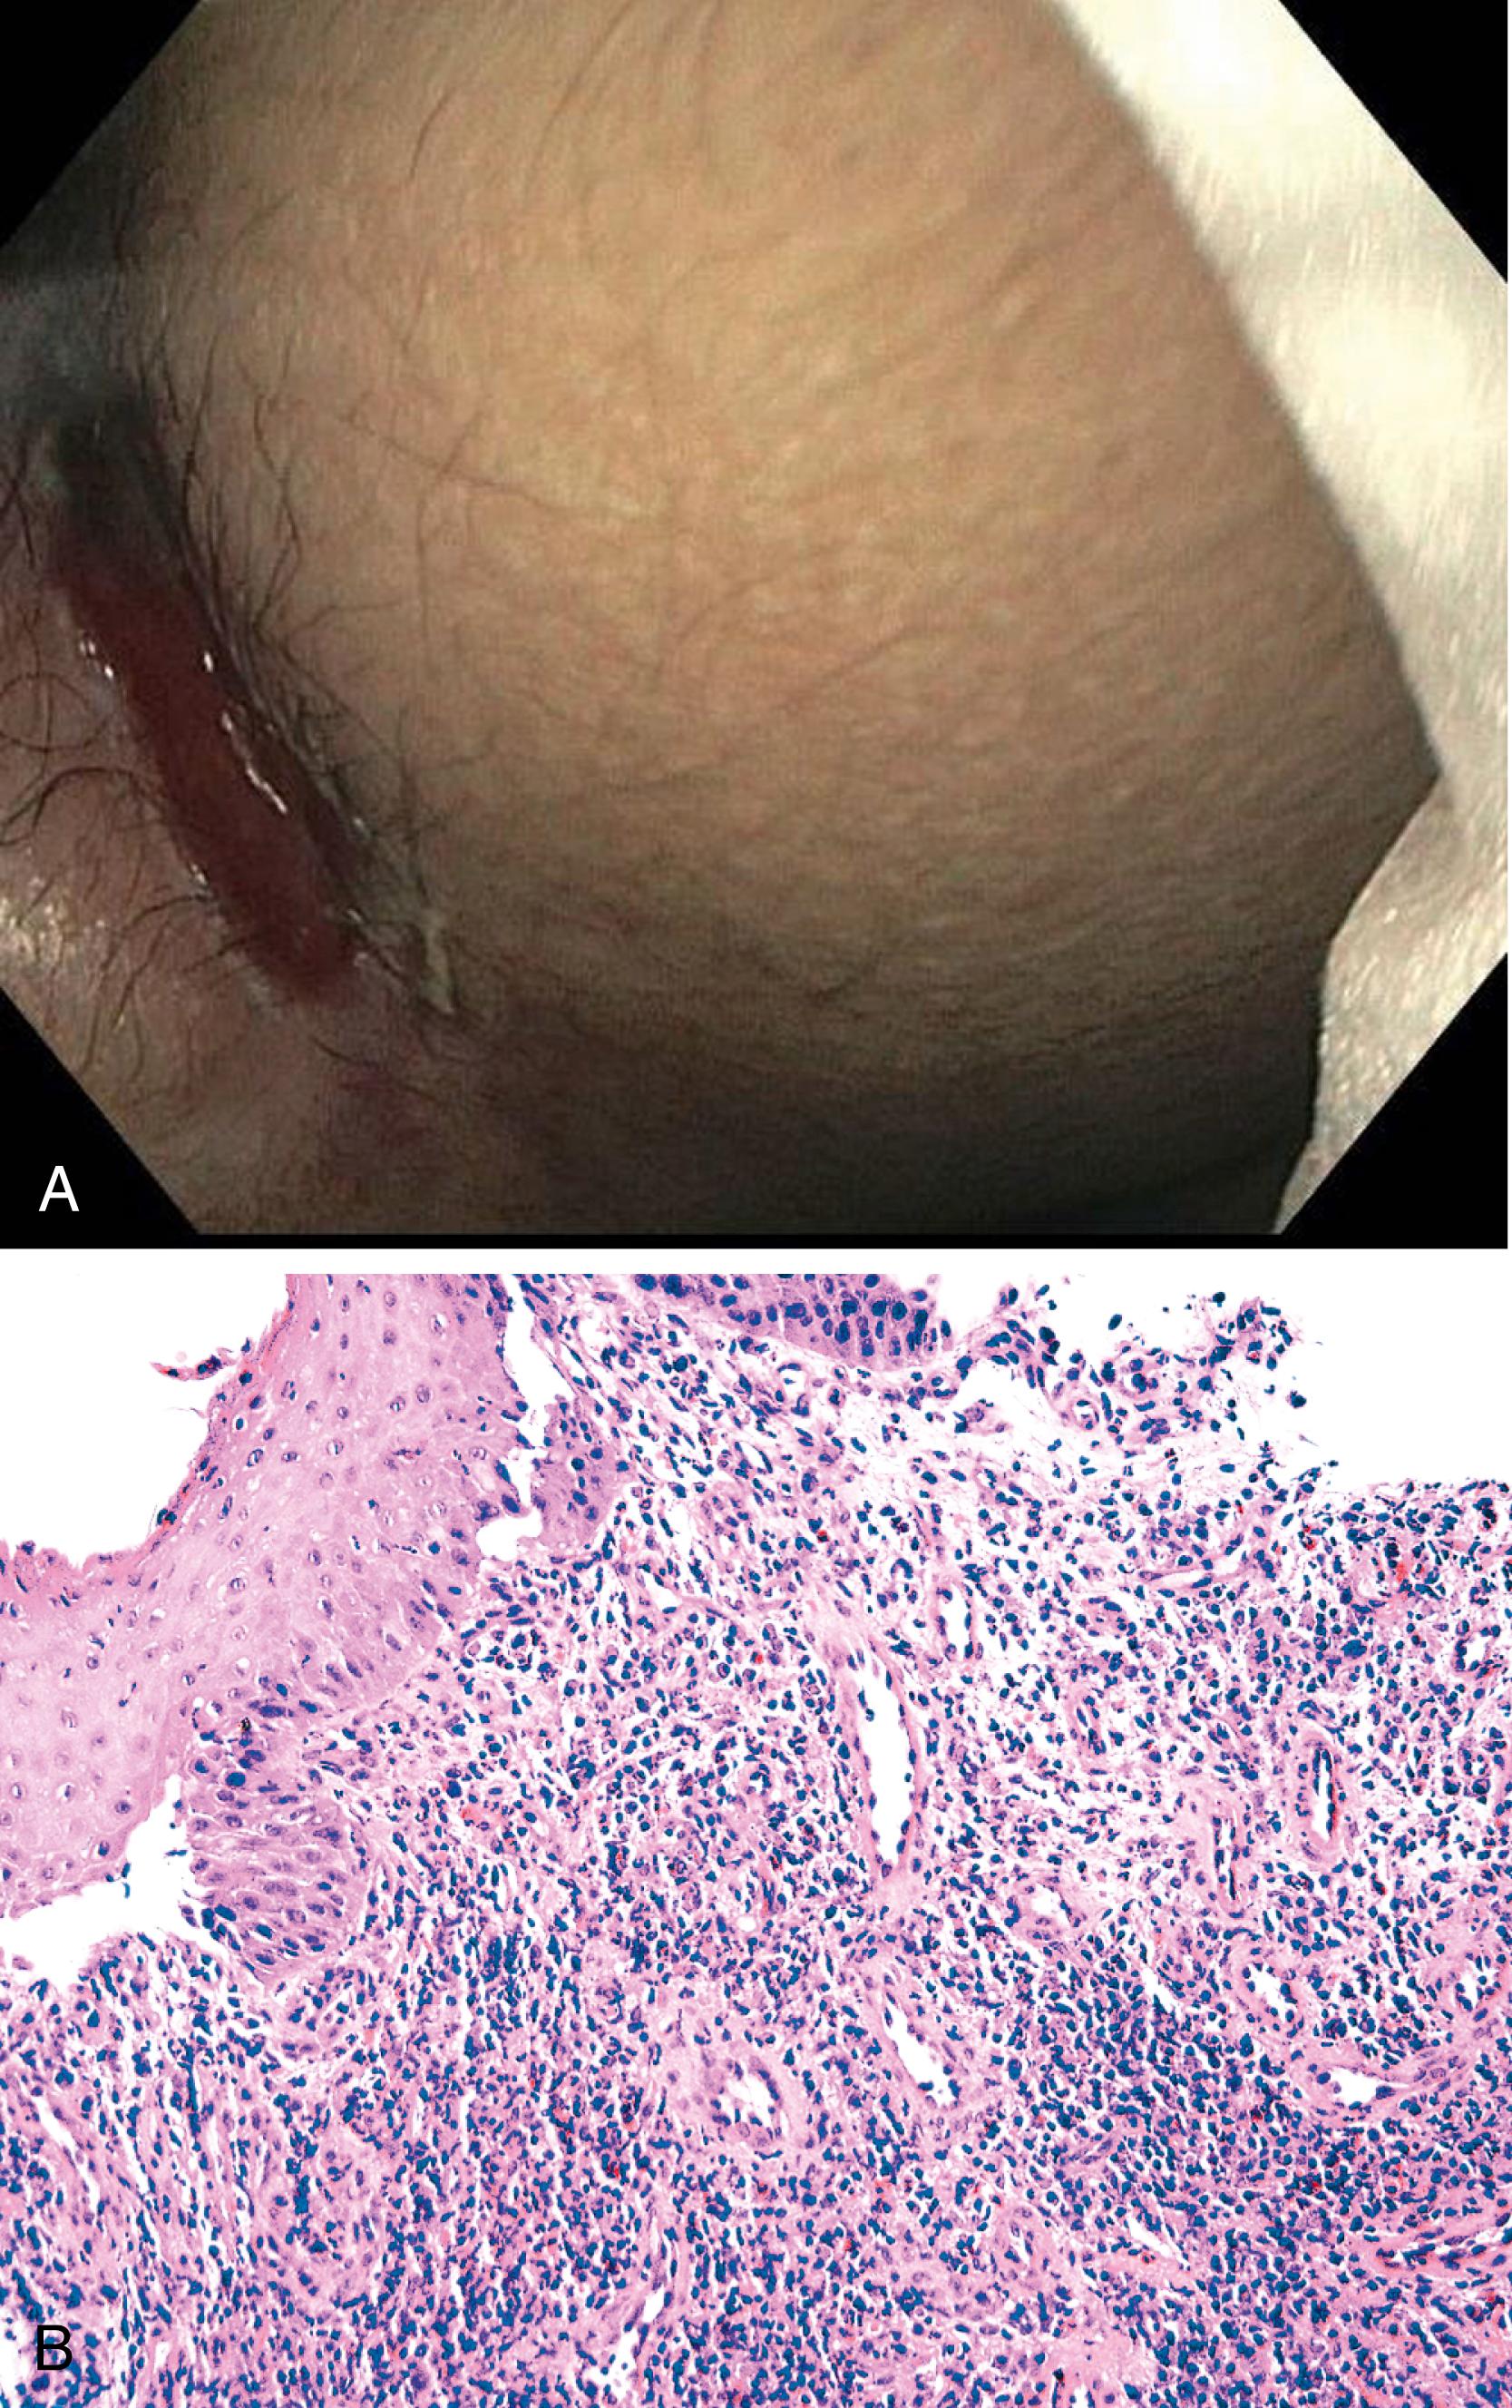 FIGURE 32.7, A, Chronic anal fissure at anoscopy. B, Typical histological findings in anal tear/fissure/ulcer. A mucosal break leads to inflammation and reactive changes of the overlying squamous epithelium (upper left) and intensely inflamed granulation tissue at the base of the break.